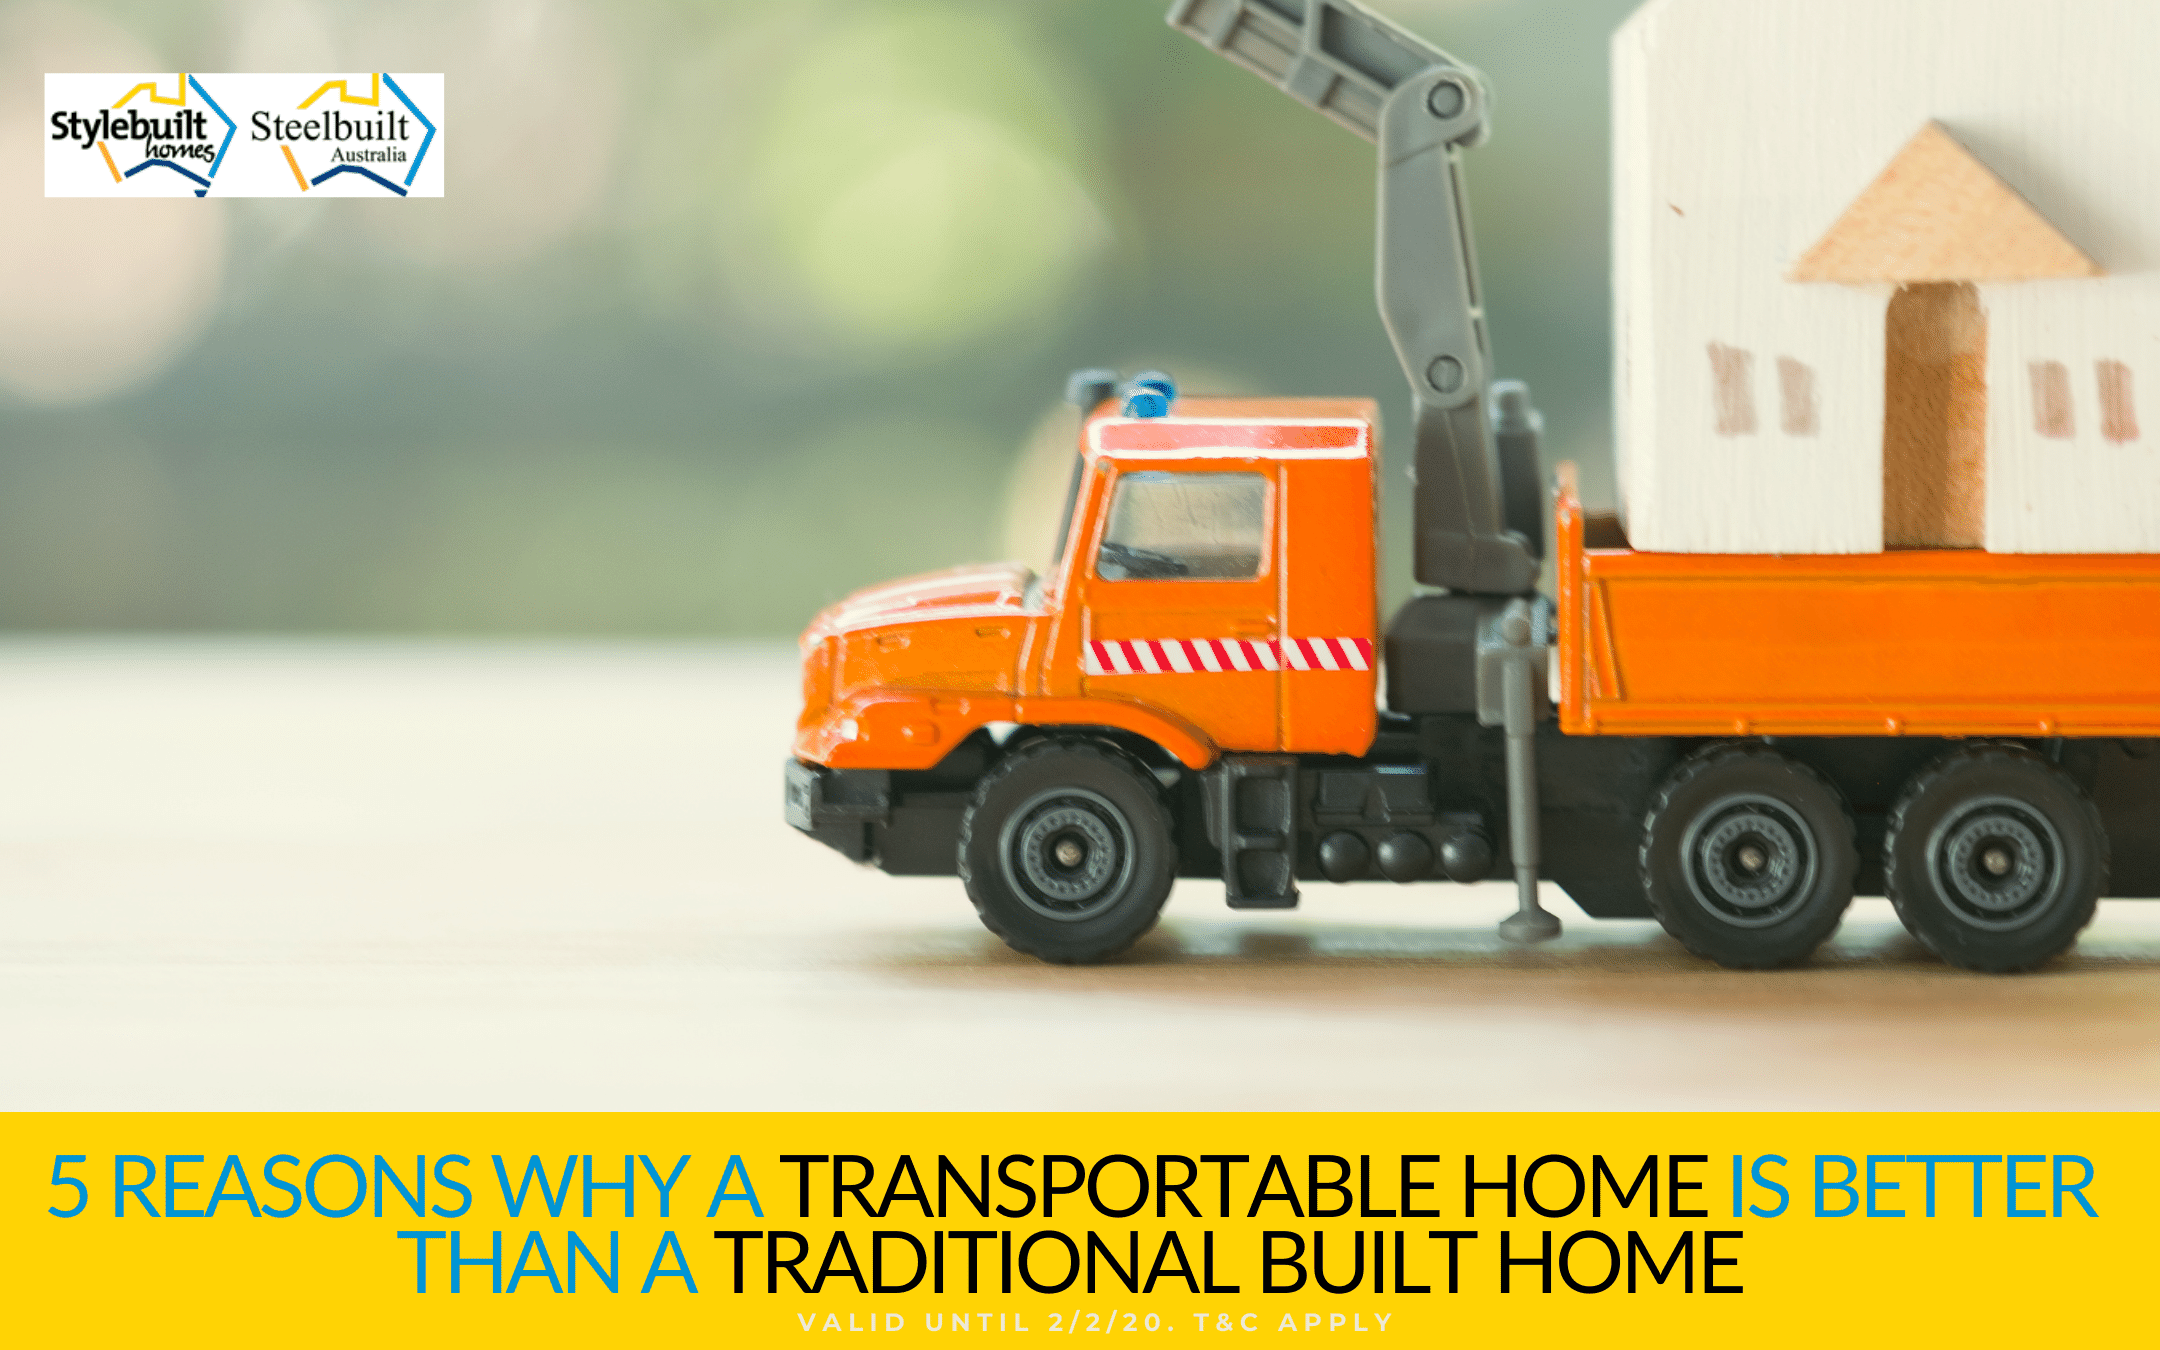 5 Reasons Why a Transportable Home is Better than a Traditional Built Home